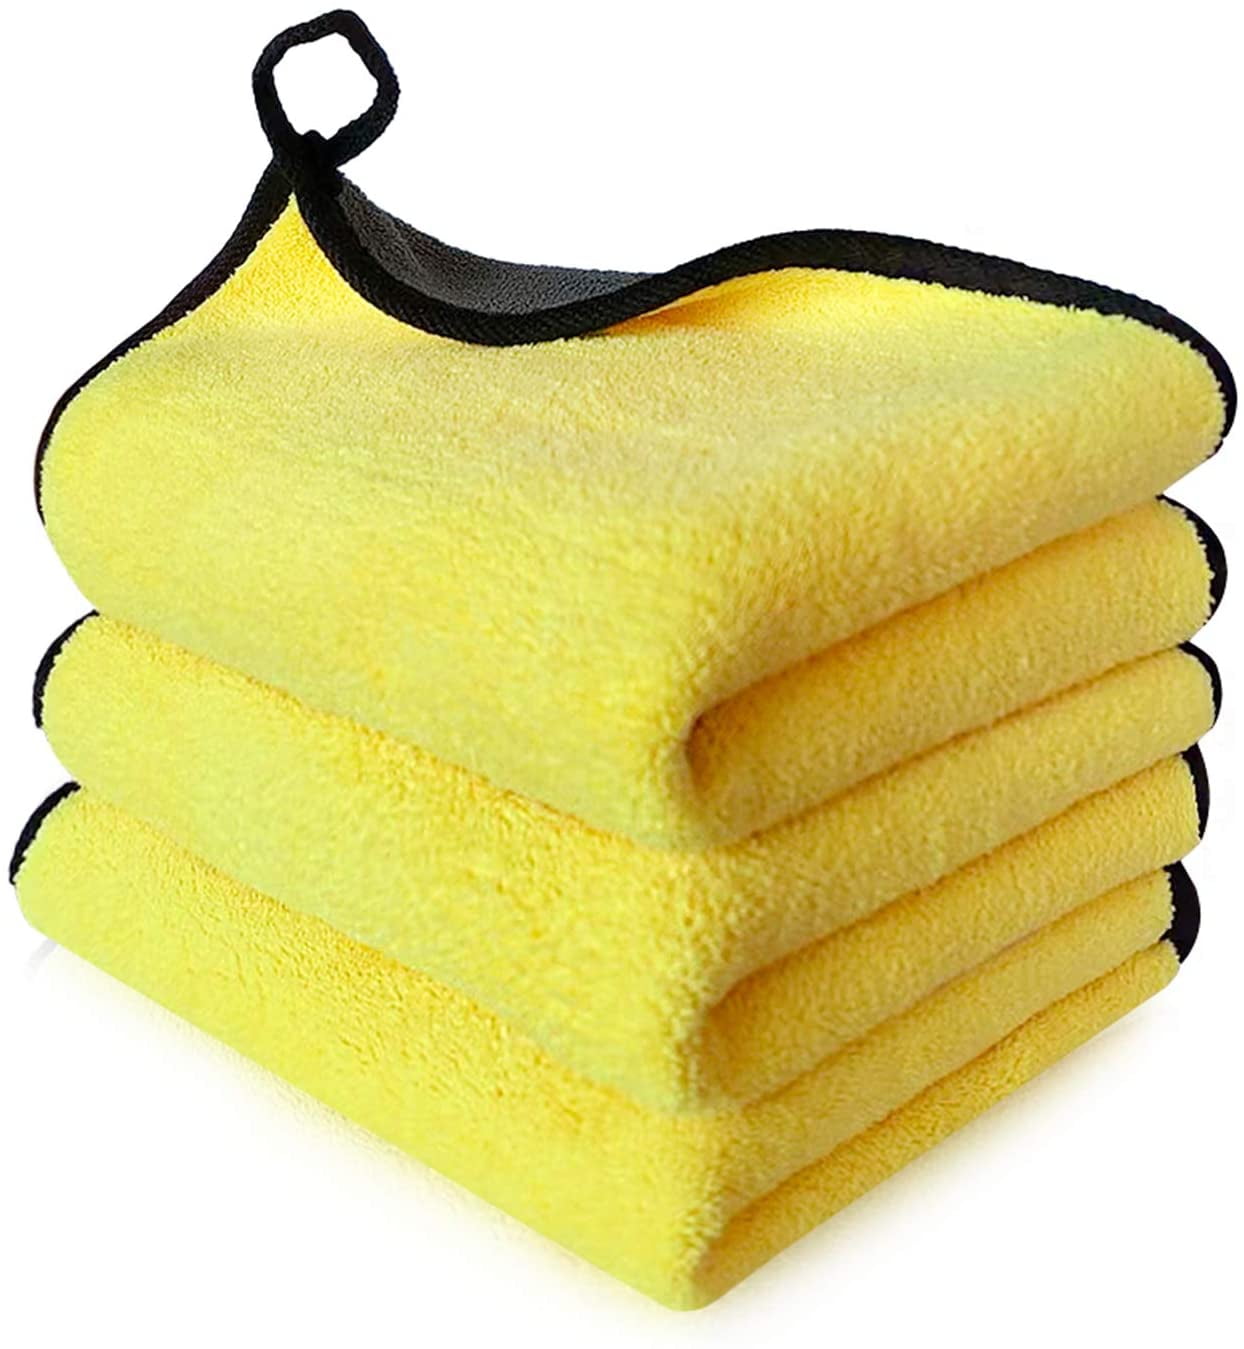 Double-Sided Microfiber Absorbent Towel Car Wash 4 Pcs Double-Sided Microfiber Cleaning Cloth Absorbent Towel Super Absorbent Dust Cloths Buffing Cloths Absorbent Towel 